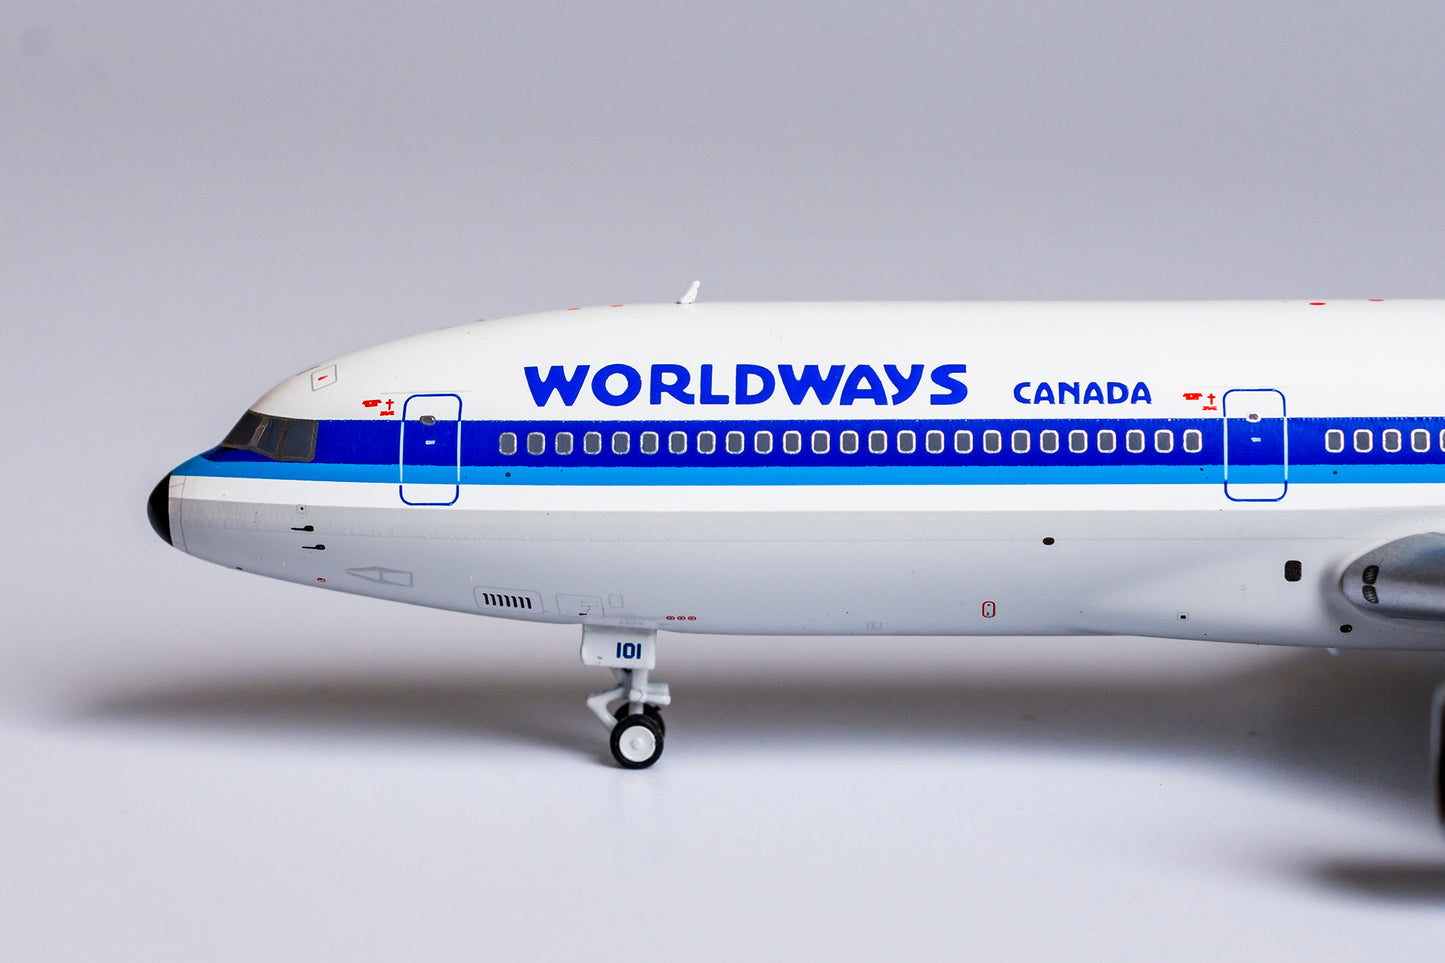 1:400 NG Models Worldways Canada L-1011-100 "Underbelly Fairing" C-GIES 31021